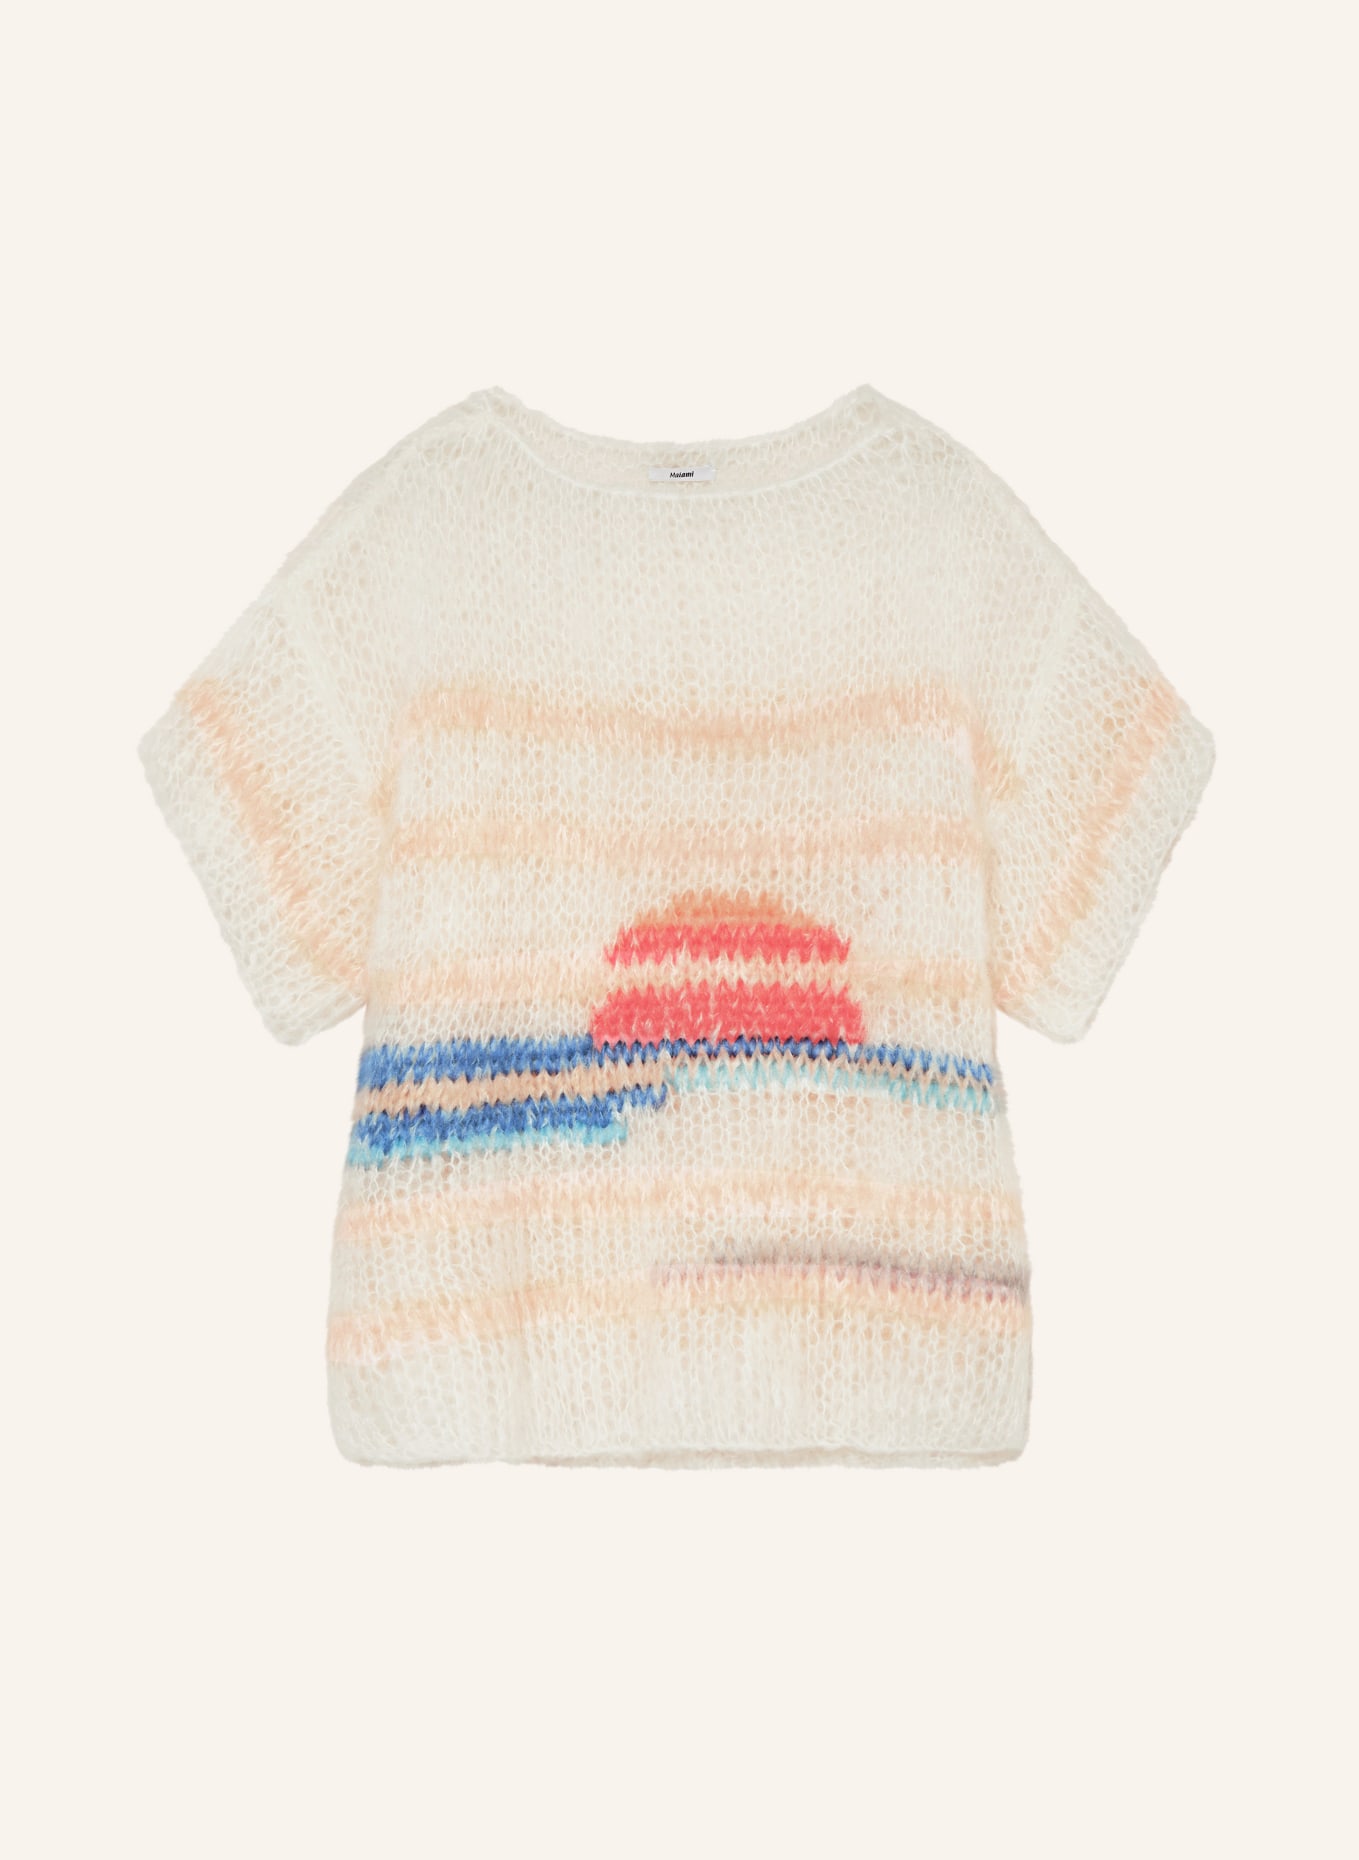 MAIAMI Knit shirt made of mohair, Color: WHITE/ RED/ BLUE (Image 1)